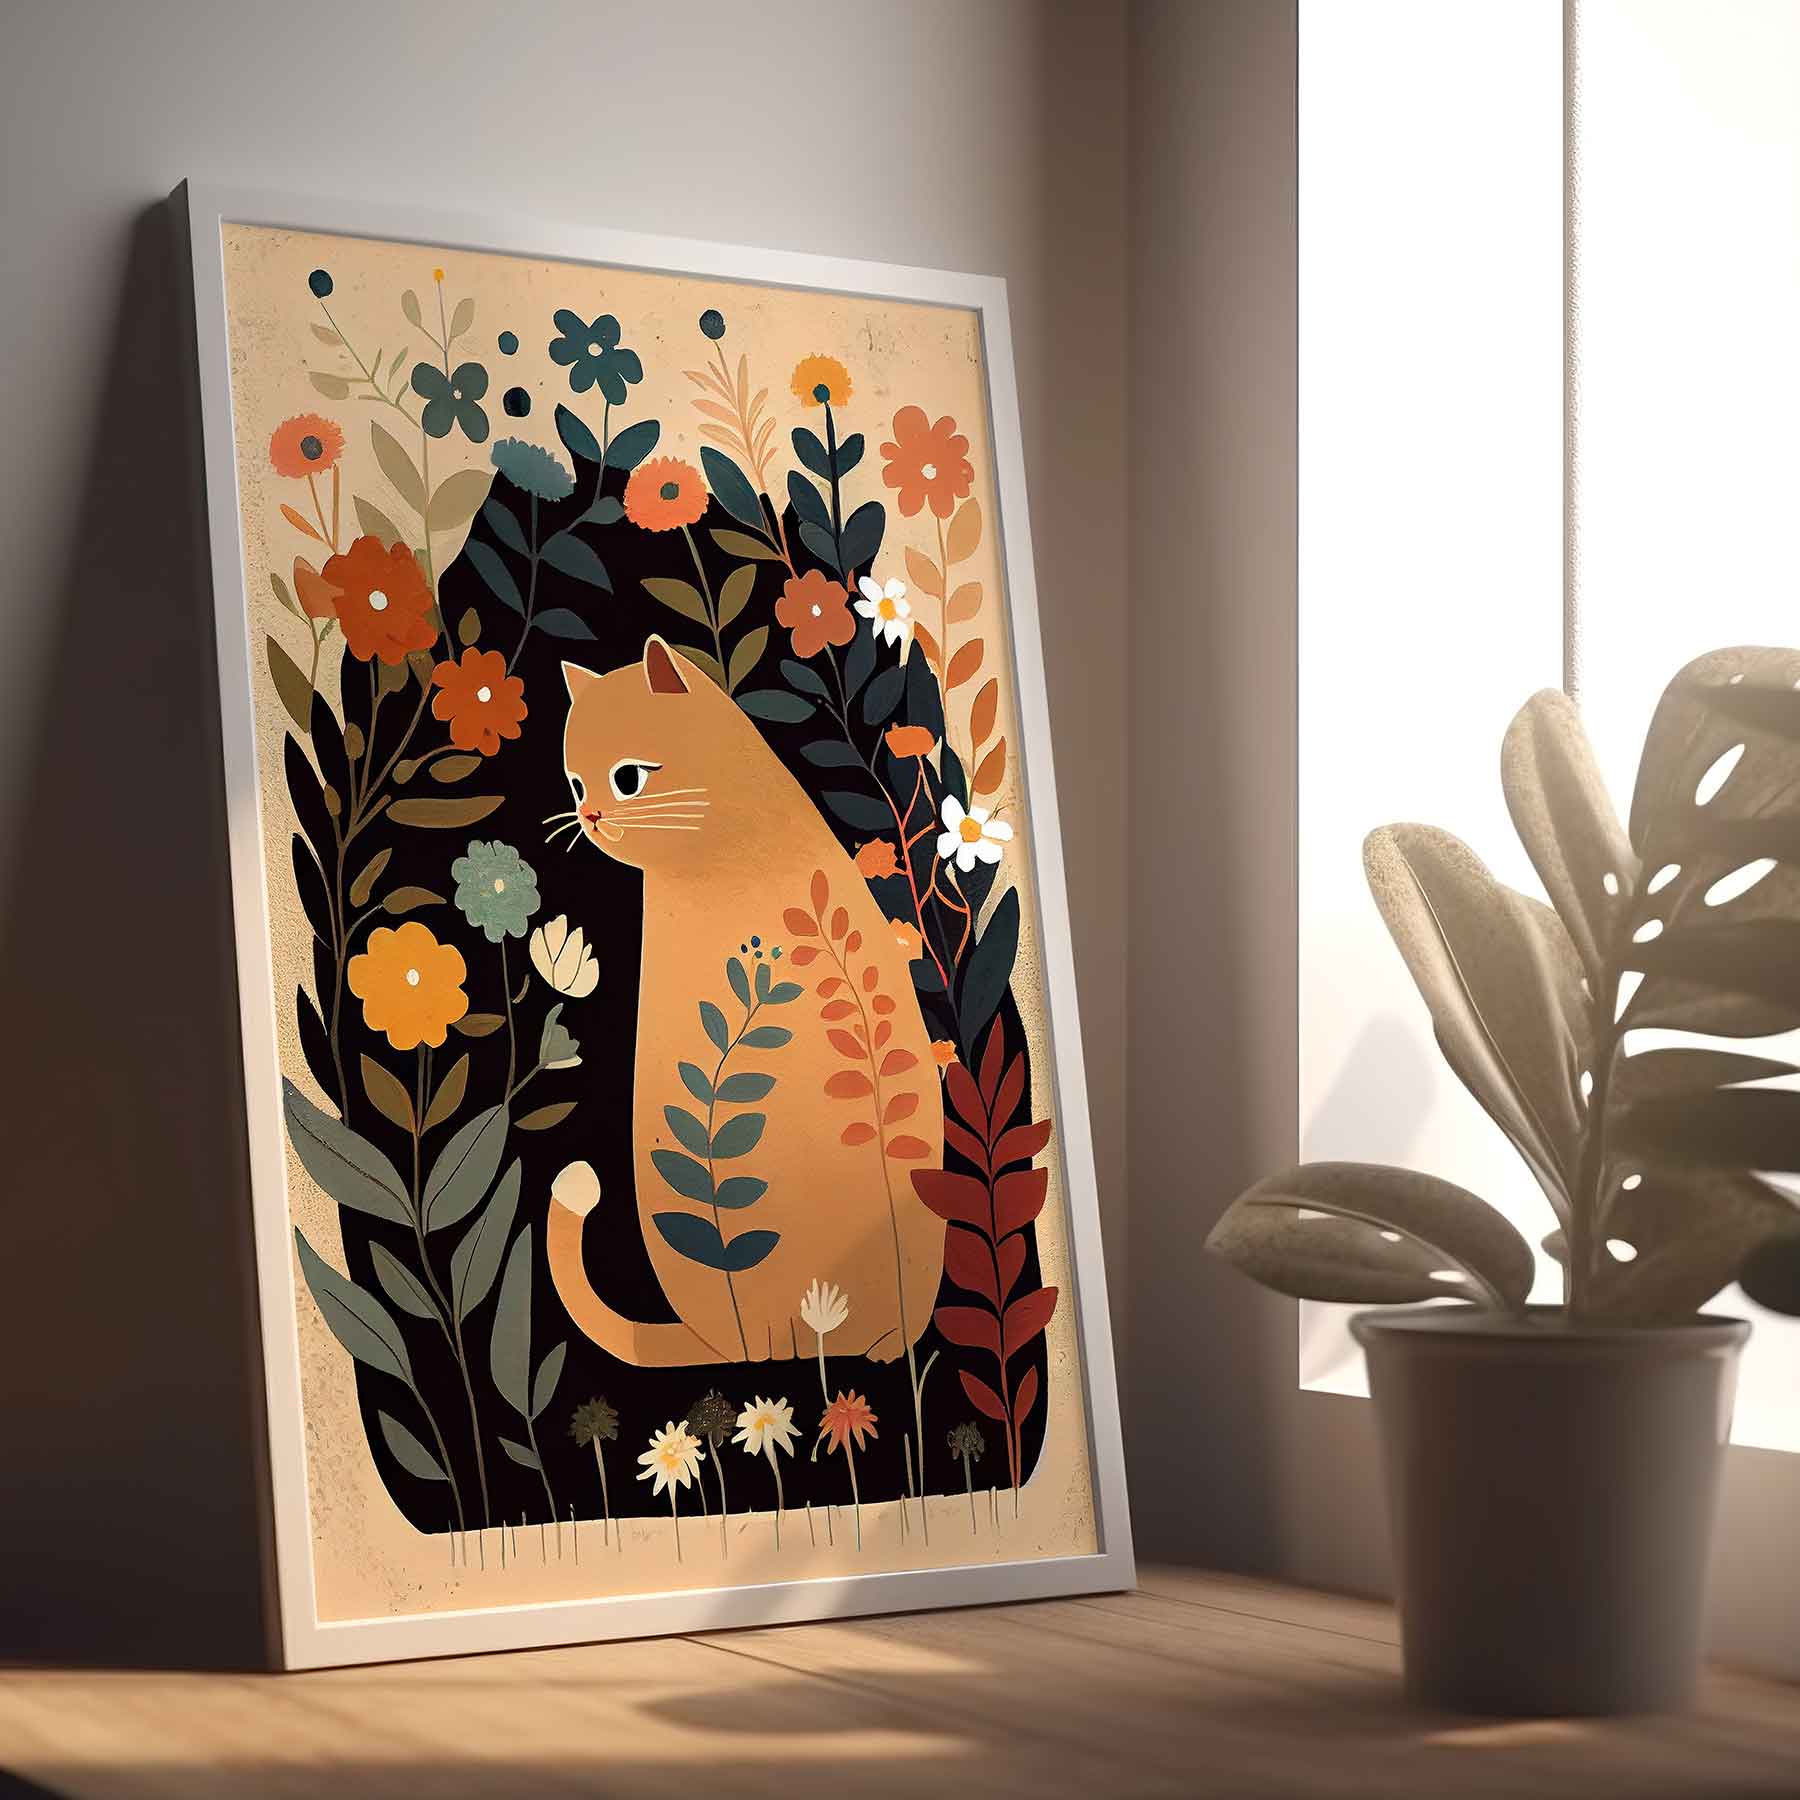 Framed Image of Cute Beige Brown Cat With Flowers Wall Art Poster Print